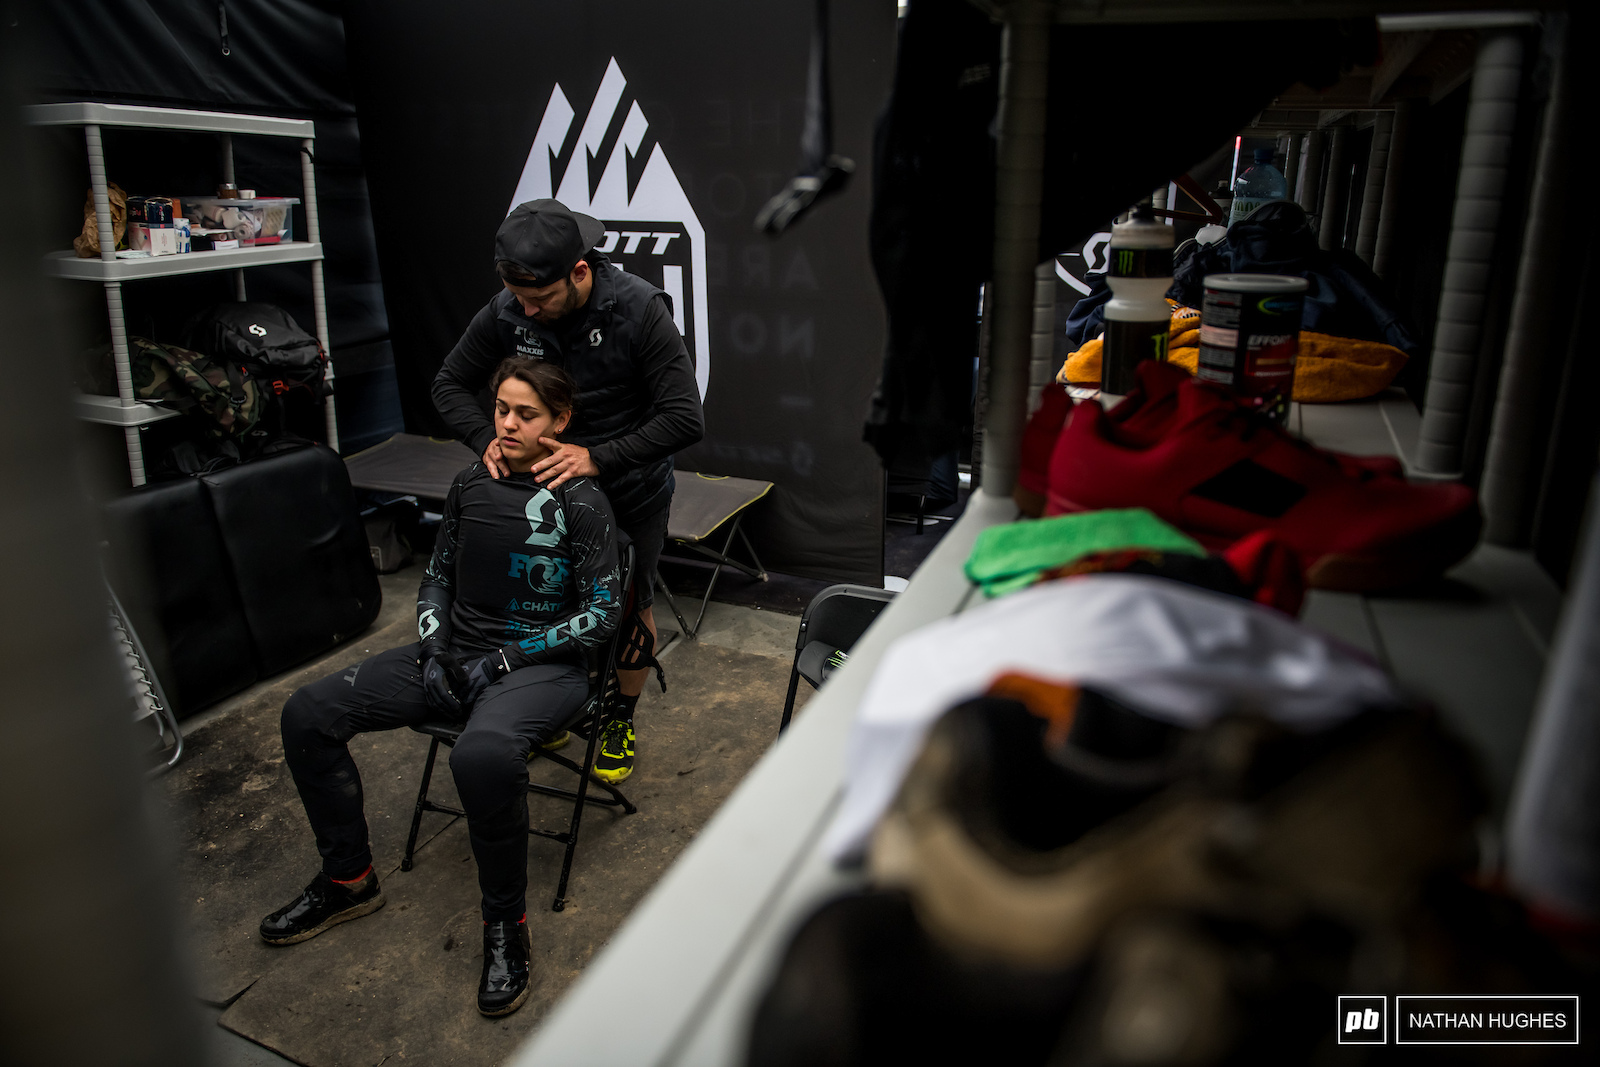 Marine Cabirou getting the body and mind prepped for a big day on the mountain and unfortunately one that would not go her way.